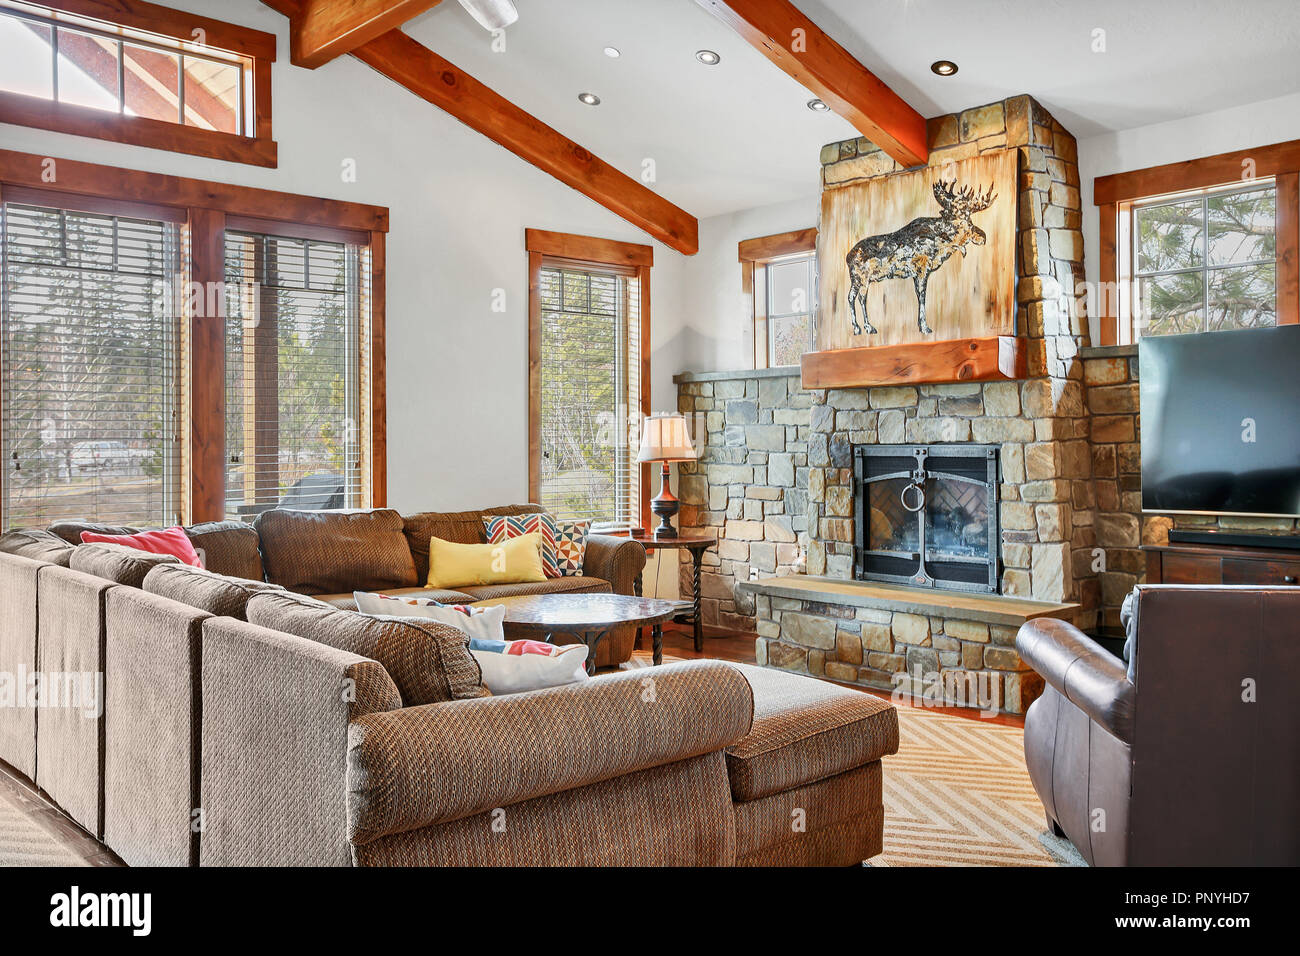 Beautiful Open Plan Home With A Well Styled Living Room Stone